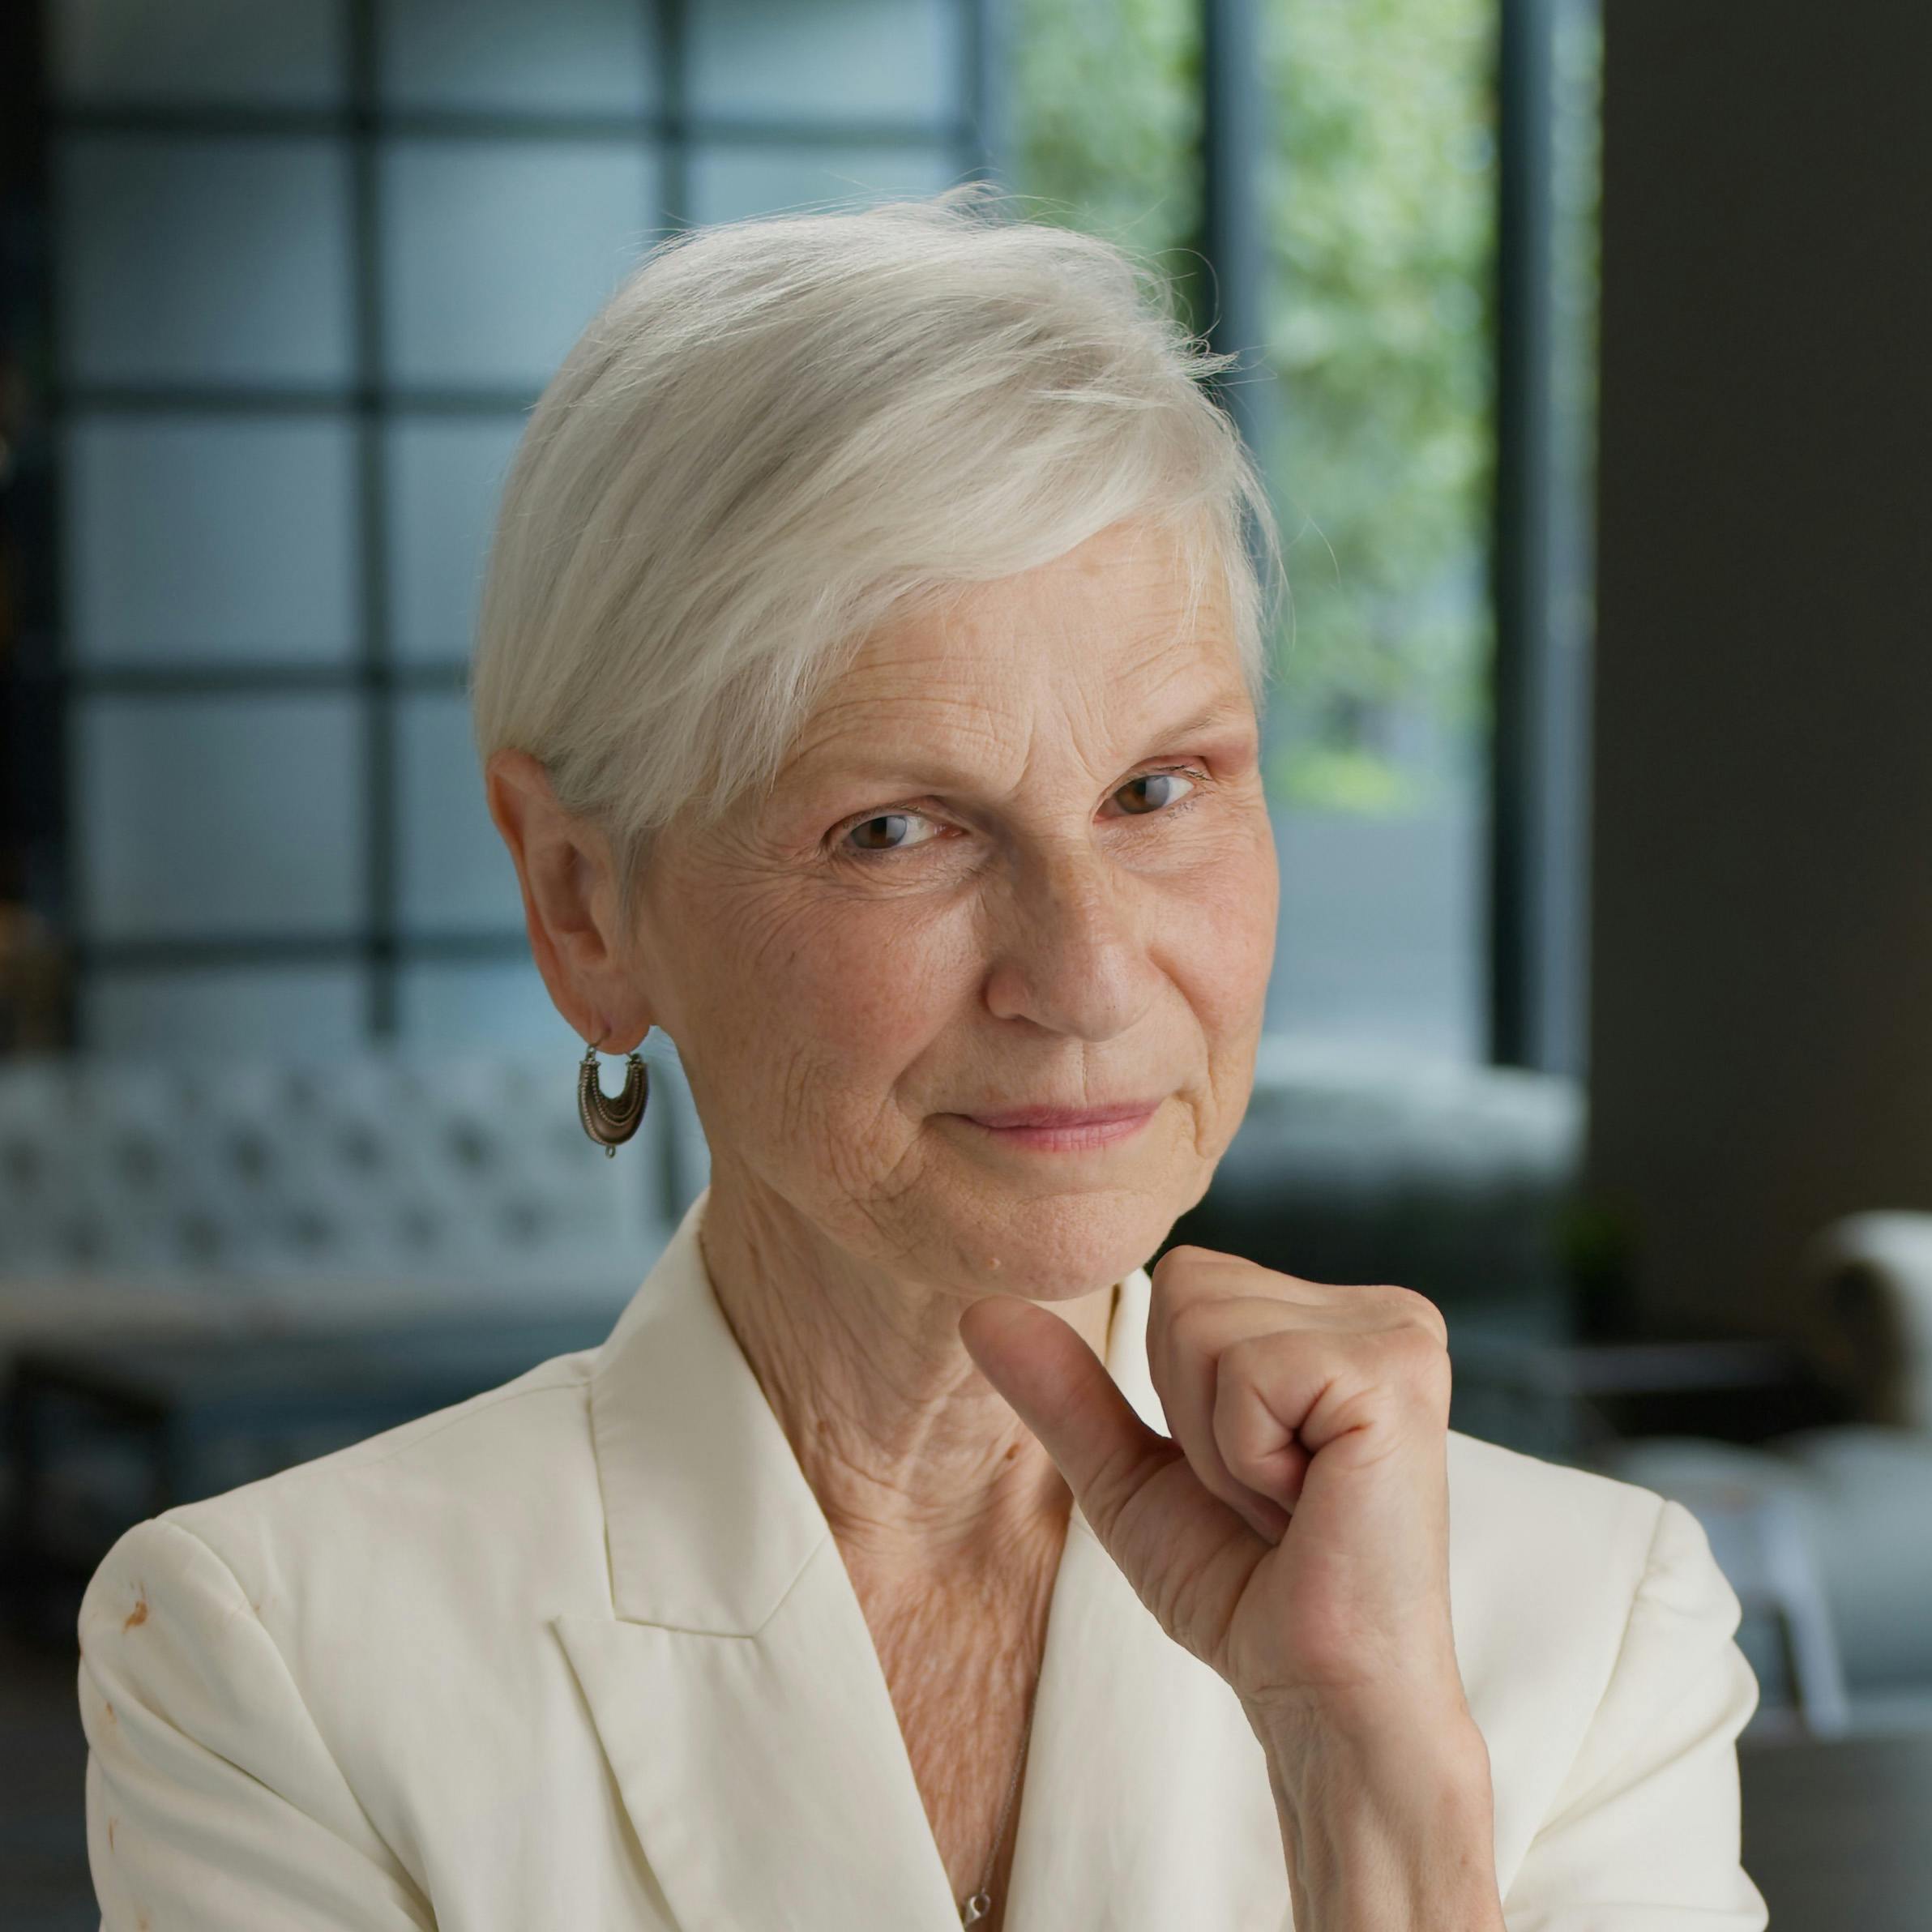 A light-skinned woman with short white hair wearing a white business suit jacket. She is looking into the camera with her head resting on her fist, with a window and sofa in the background.